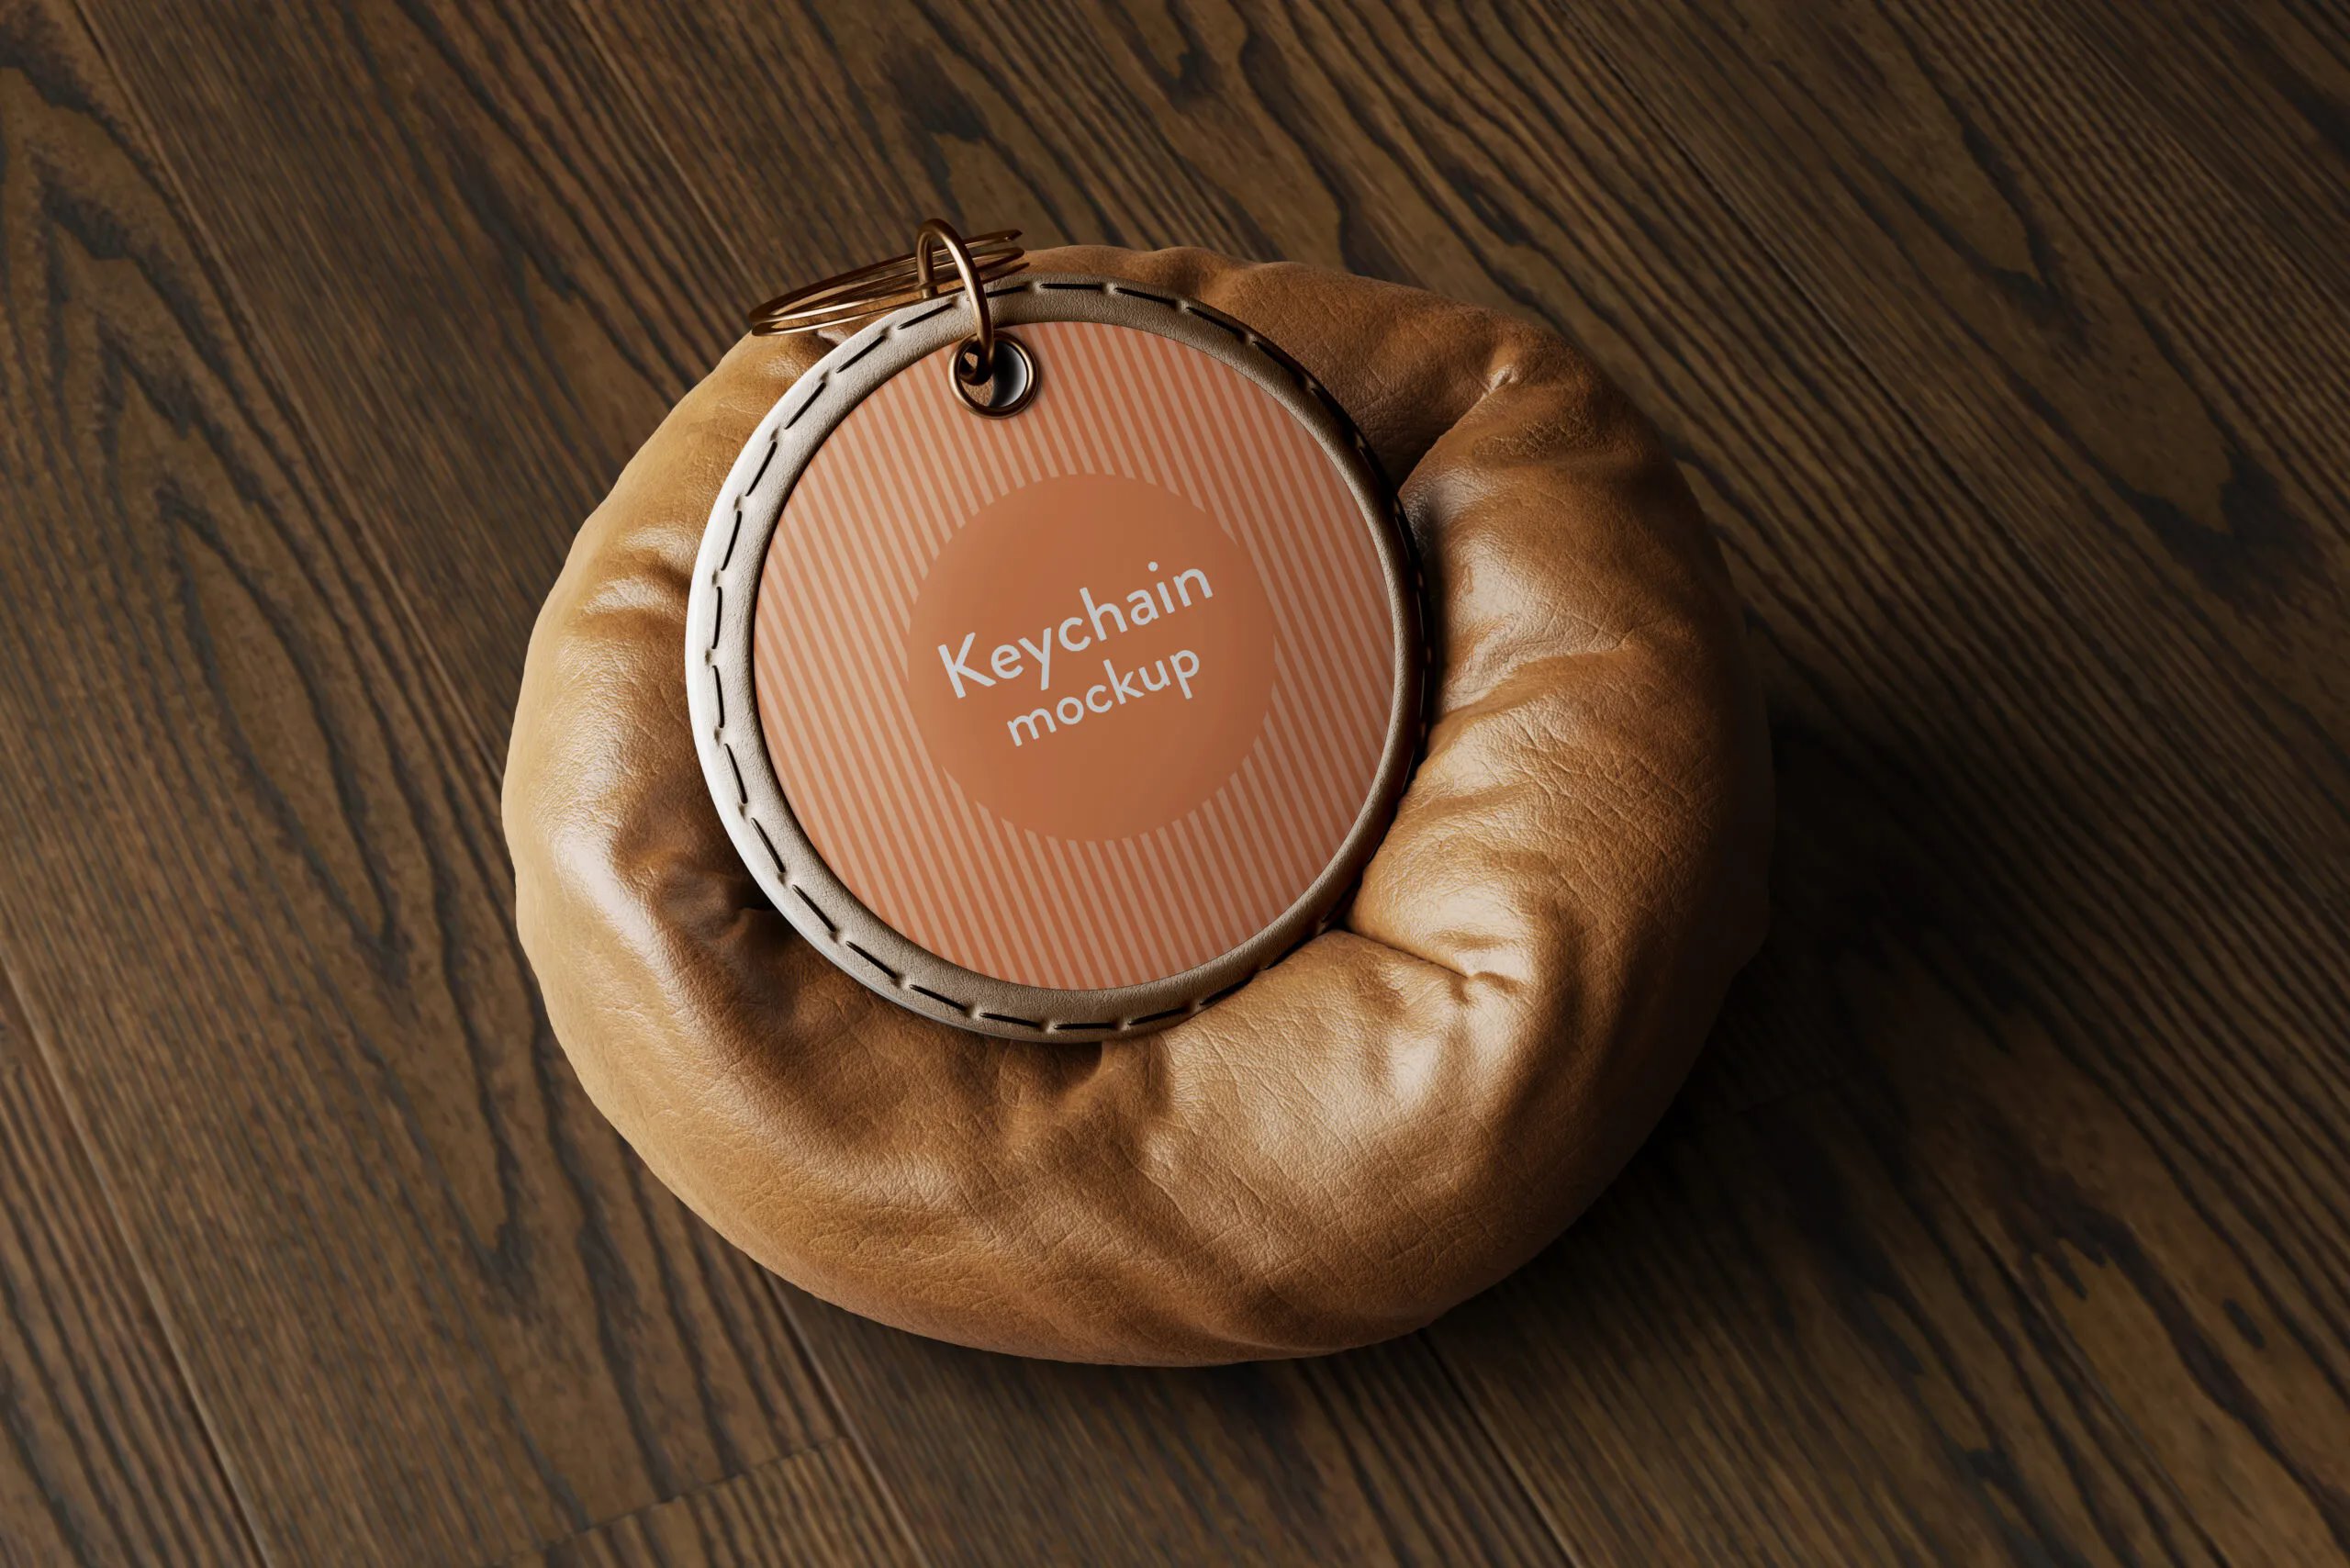 5 Round Keychain Mockup with Leather Pillow in Various Views FREE PSD